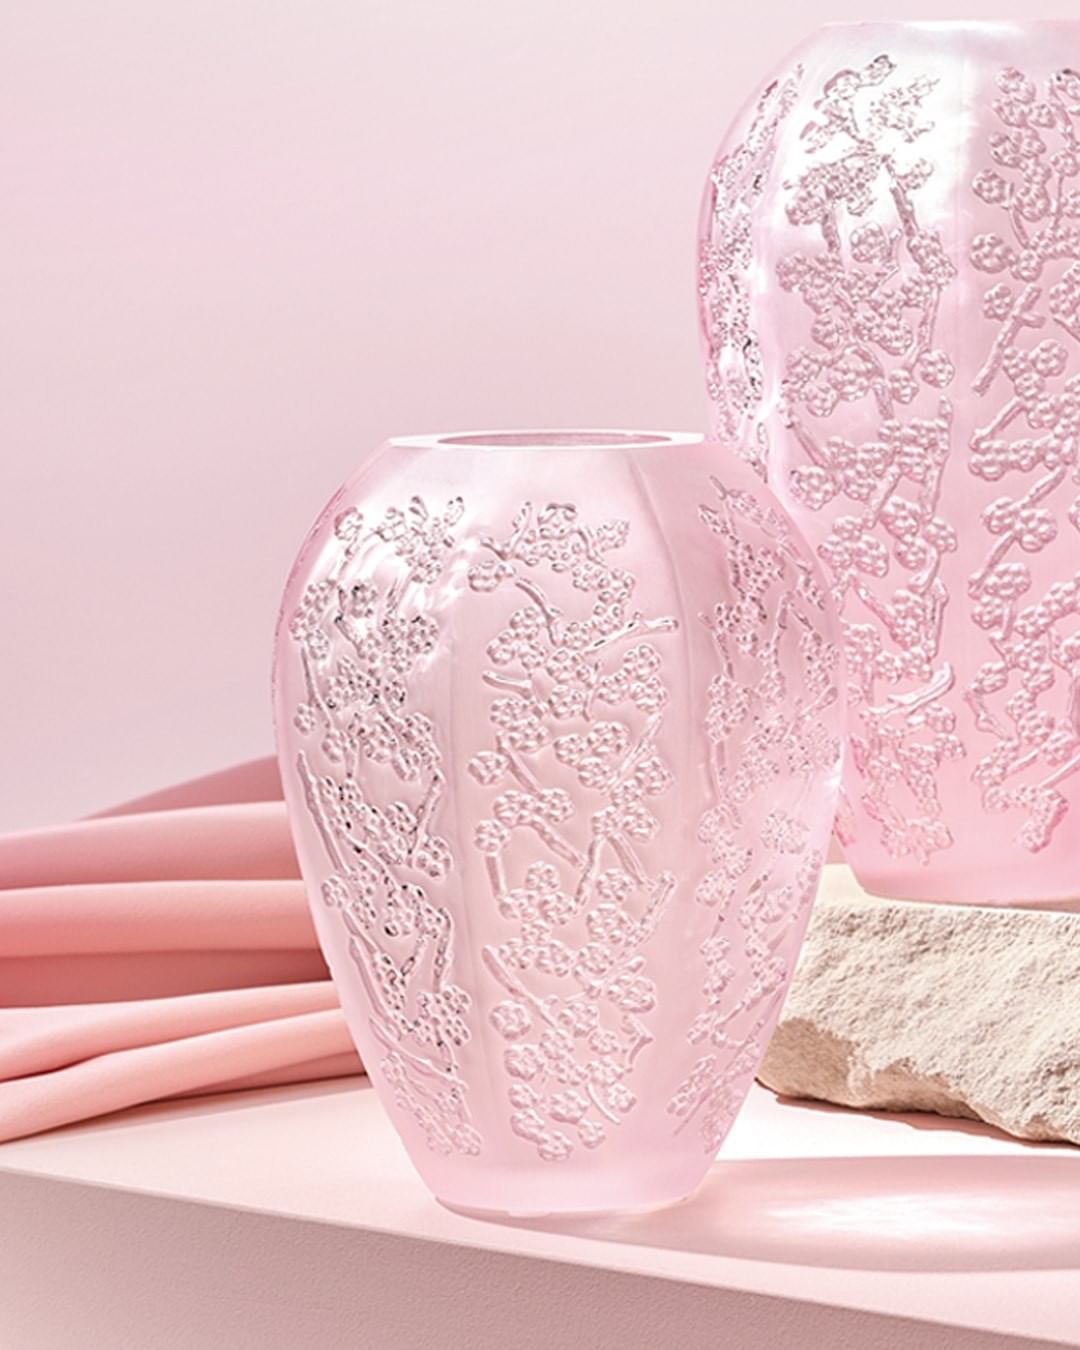 LALIQUE - The details of the cherry blossoms on the Sakura vase, is nothing short of exquisite! Available in clear crystal and in pink luster crystal.
.
.
.
.
.
#botanica #laliquebotanica #botanicacol...